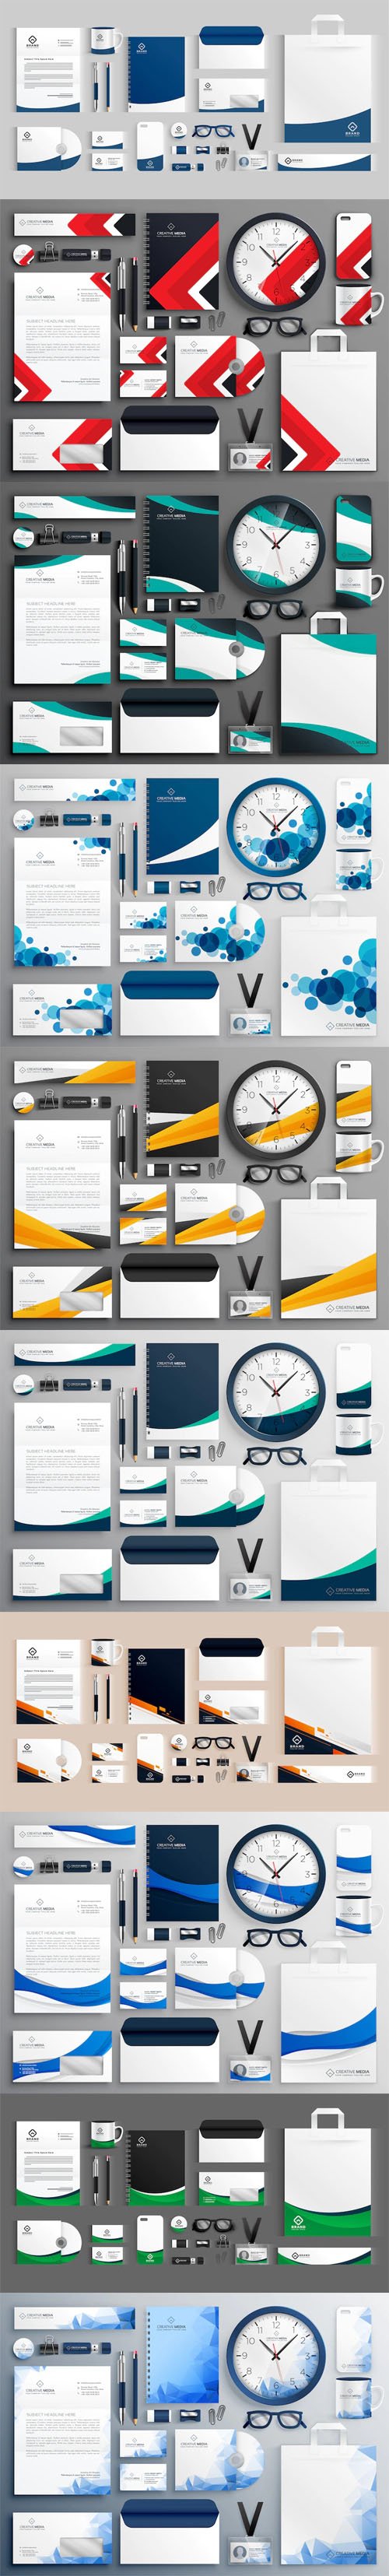 10 Professional Business Branding Stationery Vector Templates